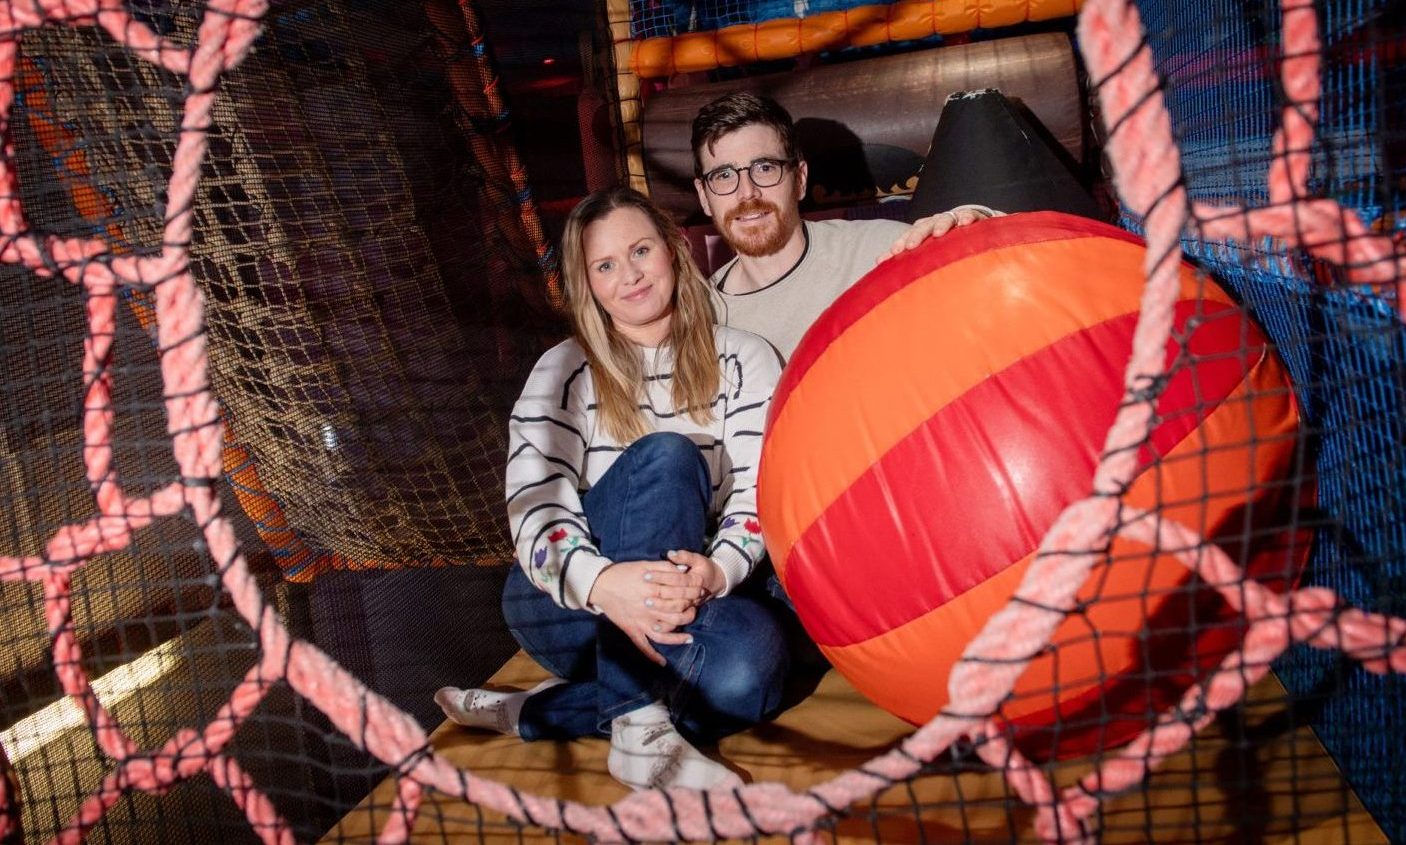 Scallywags soft play in Stonehaven has been taken over by new owners Moira Cooper and Alan Willamson.